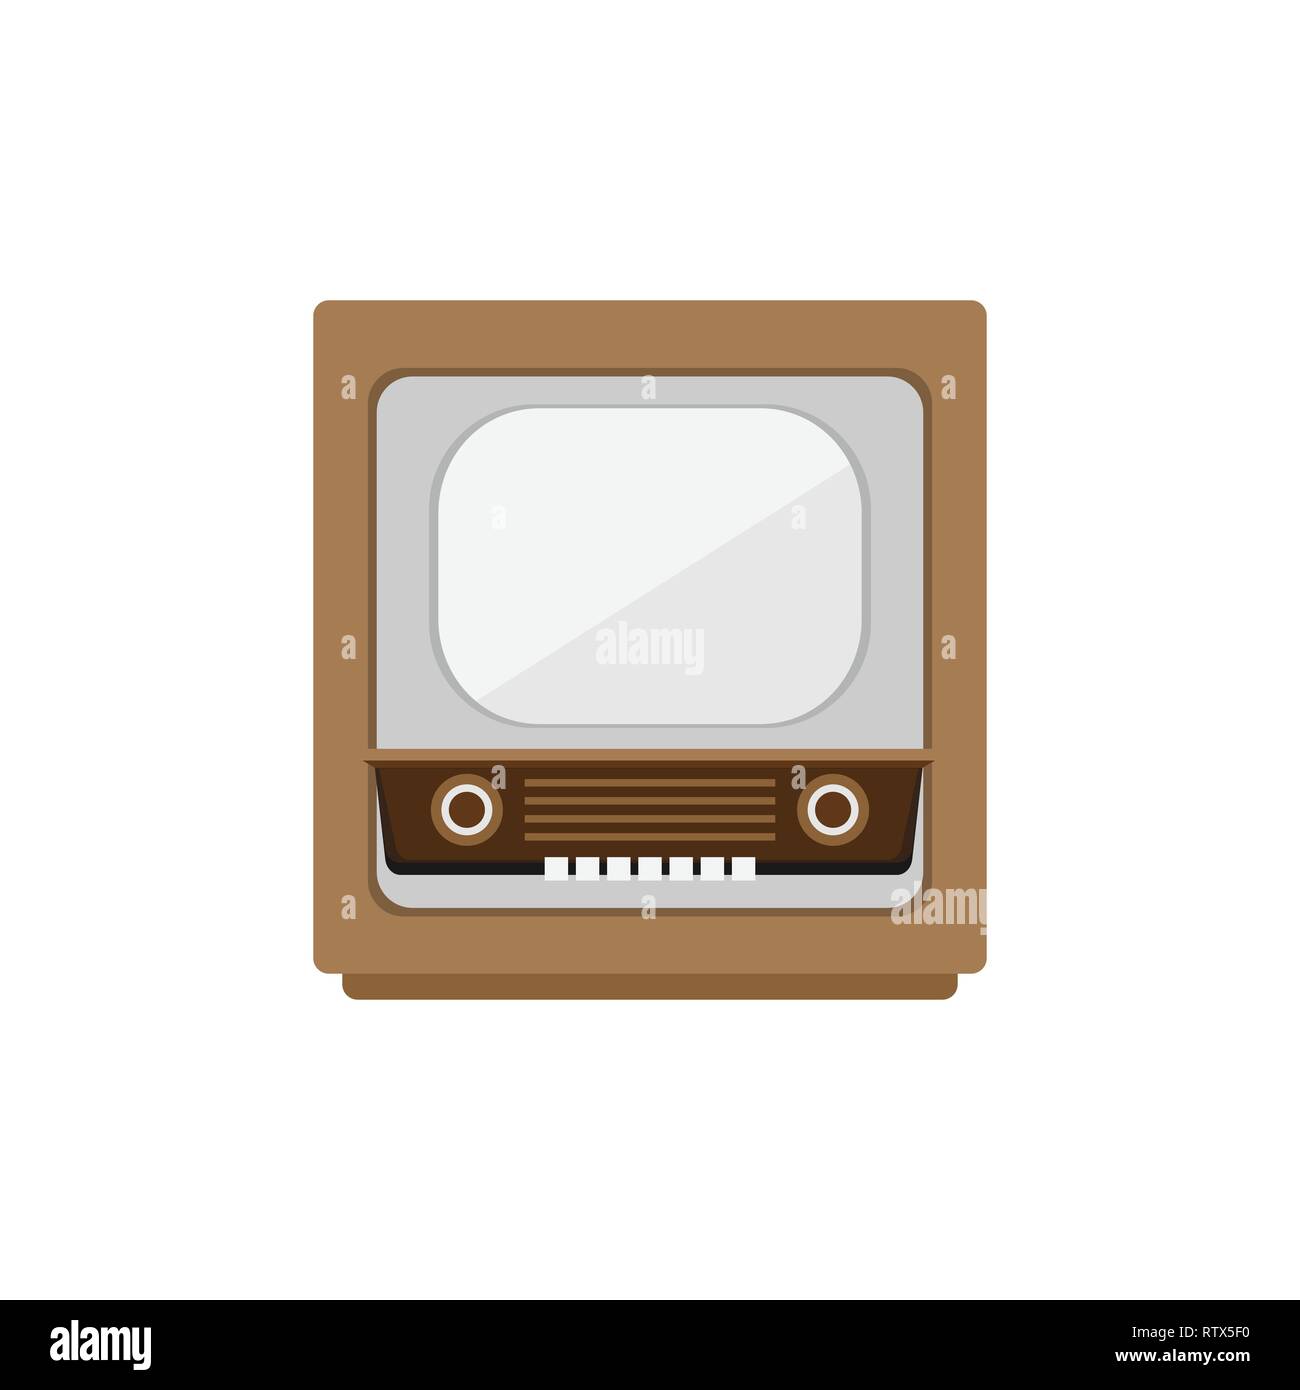 Retro old vintage television flat design isolated on white background. Stock Vector